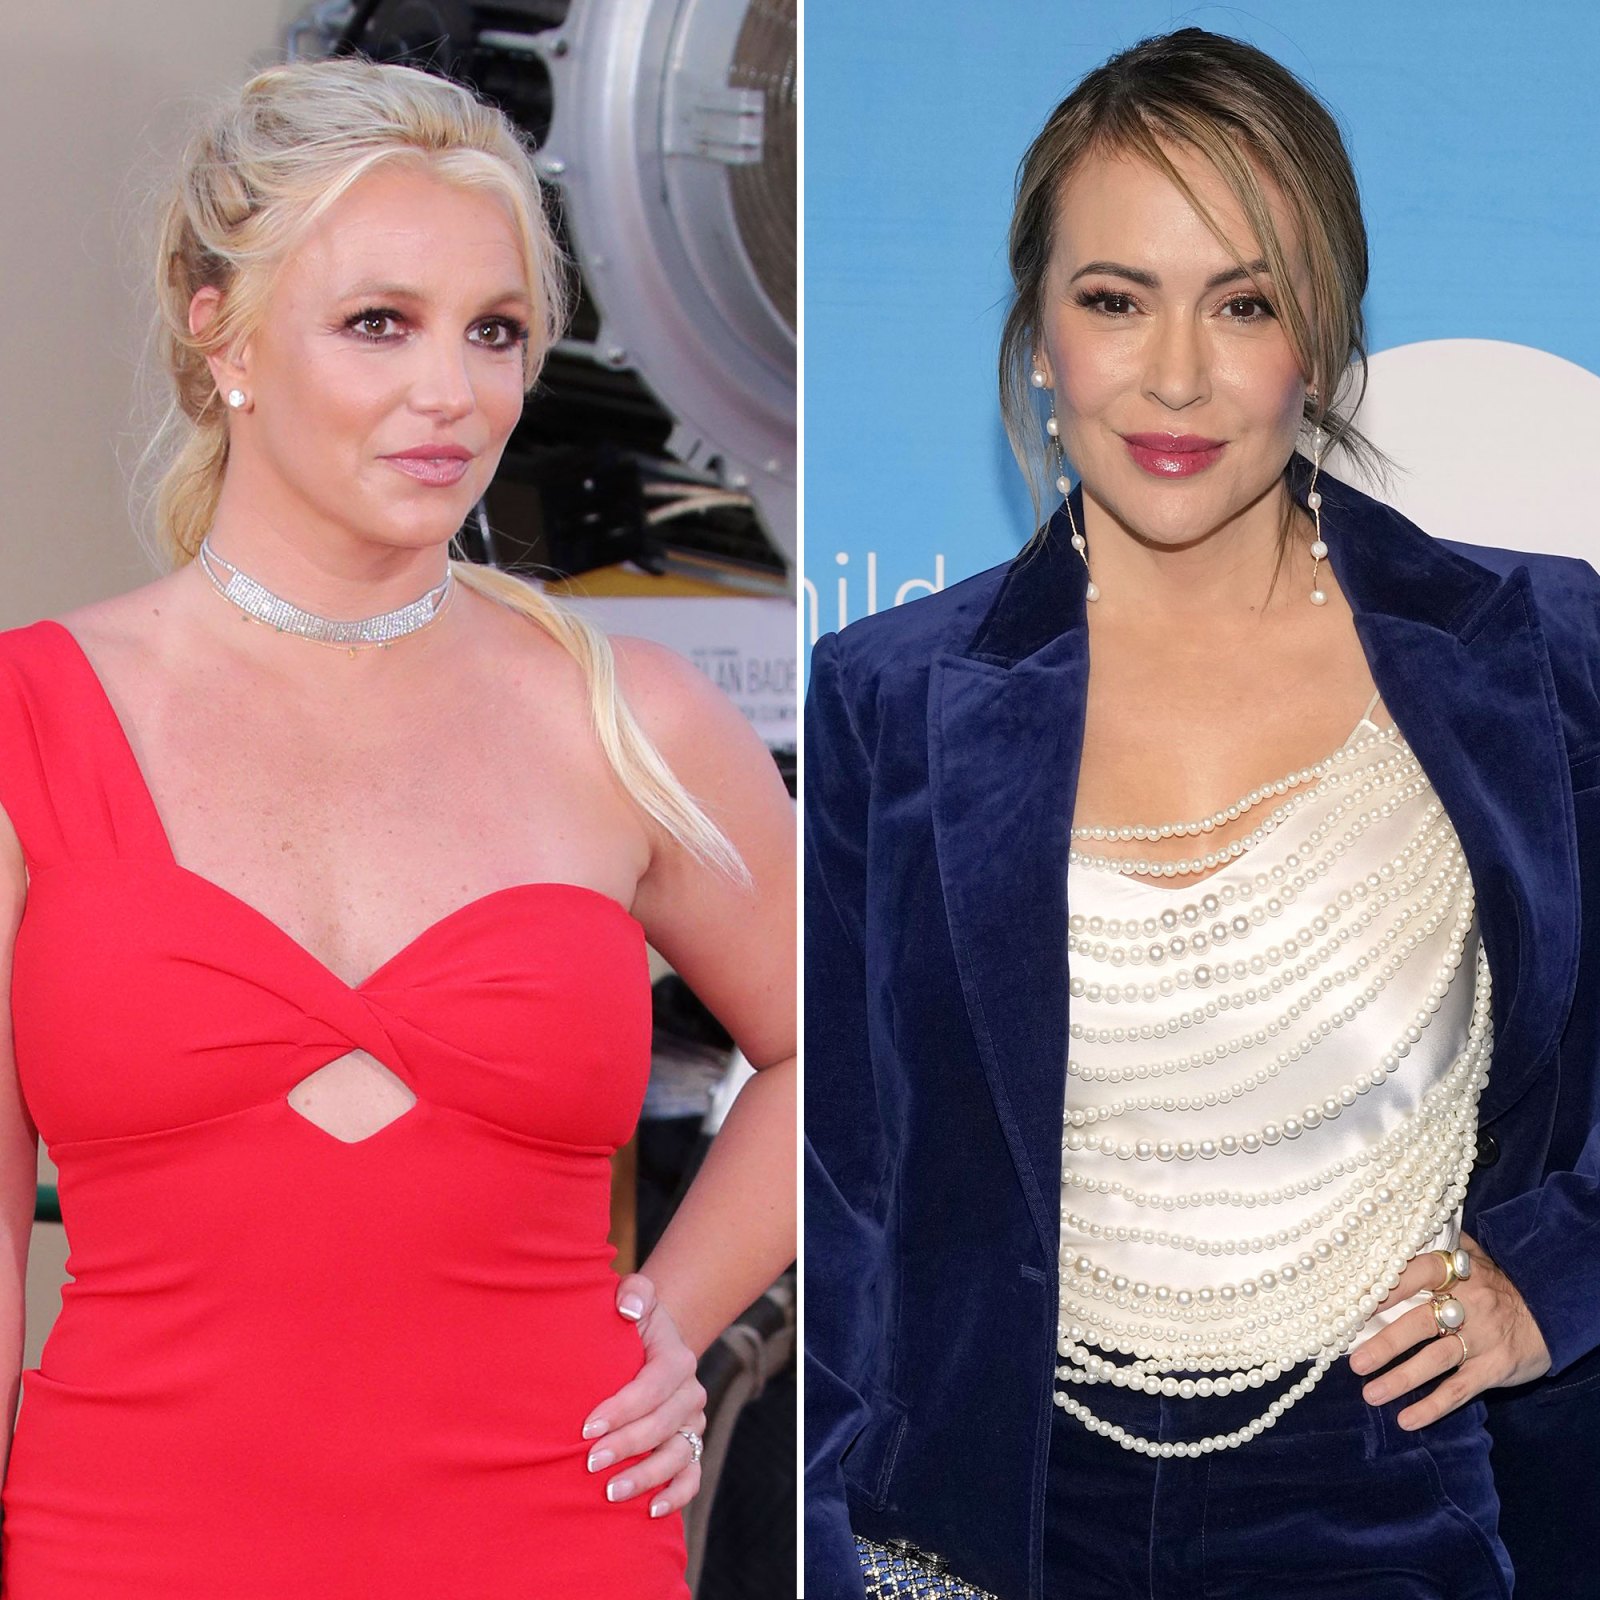 Anjelica Porn Ass - Unexpected Celebrity Feuds We Never Saw Coming